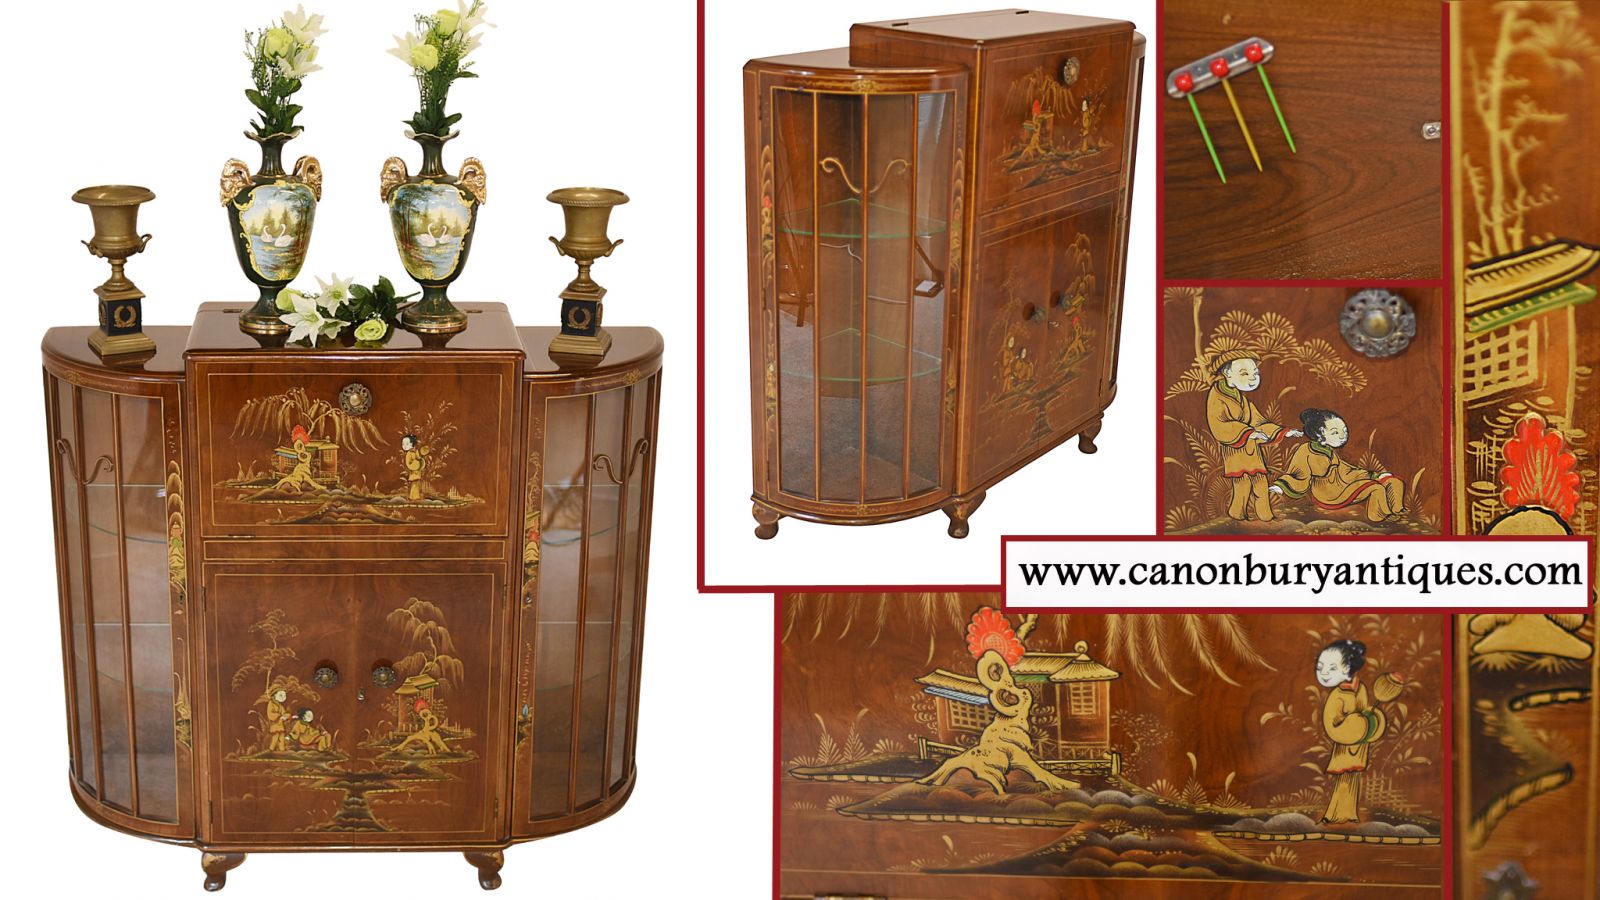 Period 1920s Cocktail Cabinet with Chinoiserie